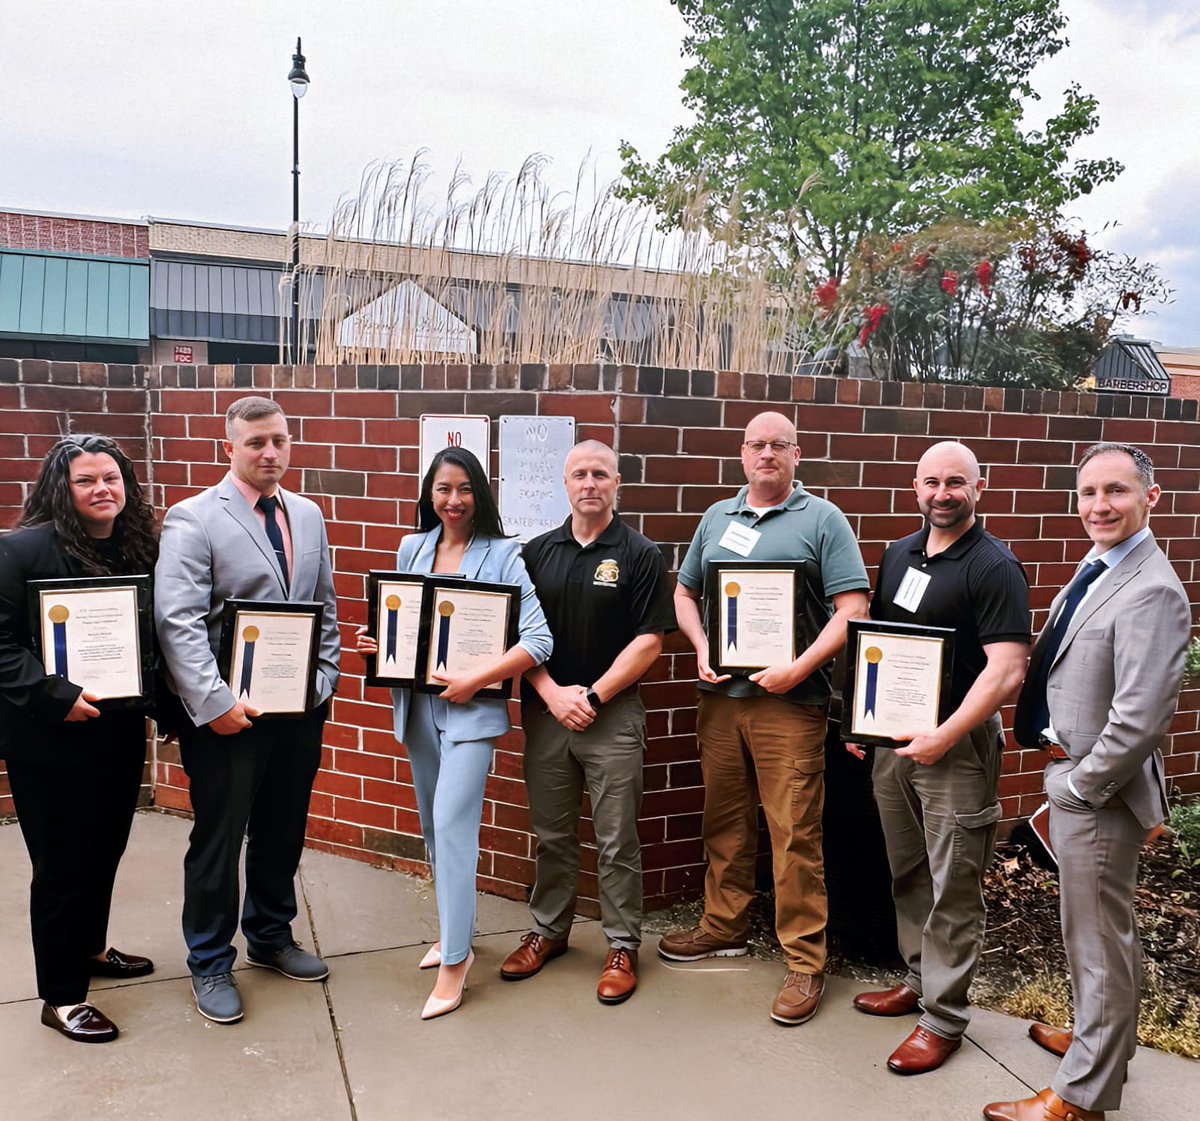 Today, the #ProjectSafeChildhood Awards and Seminar, presented Chief Counsel, Joyce King, Detective Dave DeWees from Frederick Police Department, Det. Leveille, FCSO and Kristen Brewer, HSI with awards for exceptional contributions to child exploitation investigations.